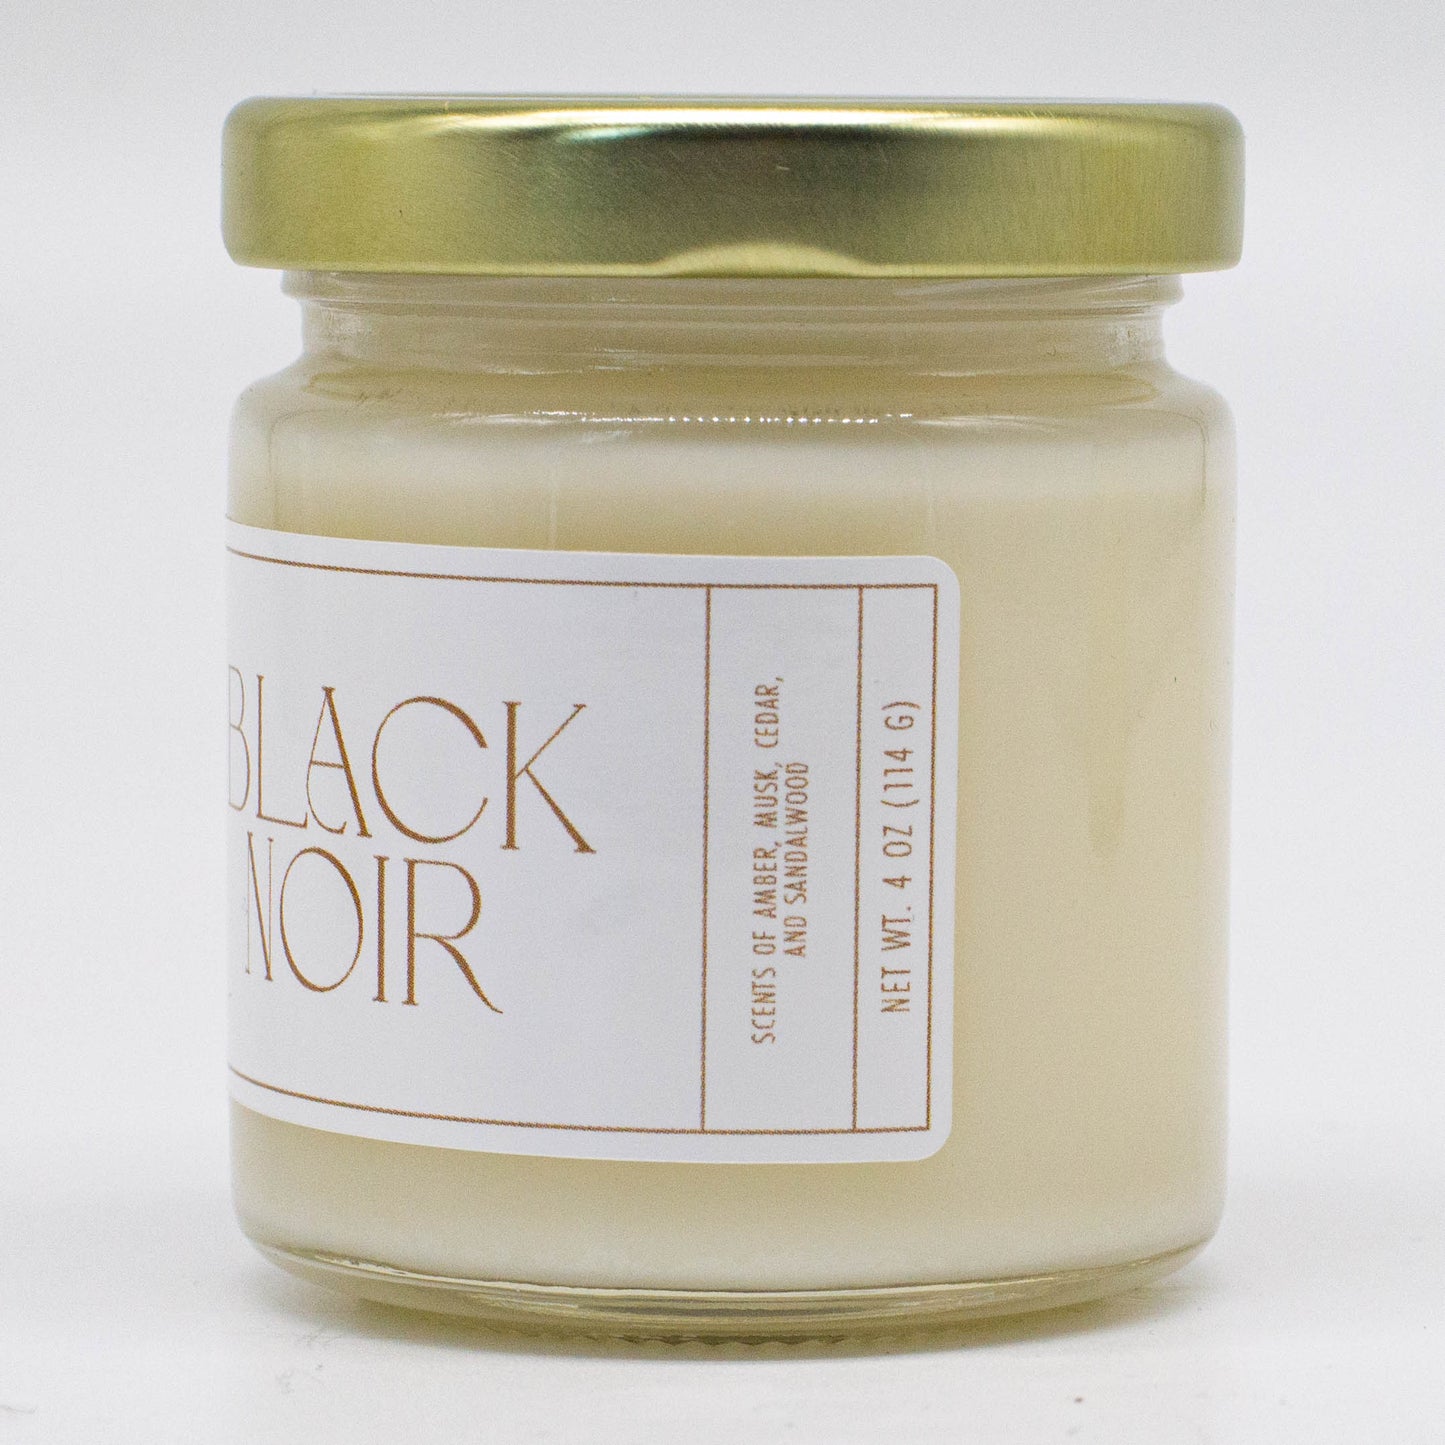 Black Noir, Amber and Musk Soy Candle, 4 oz